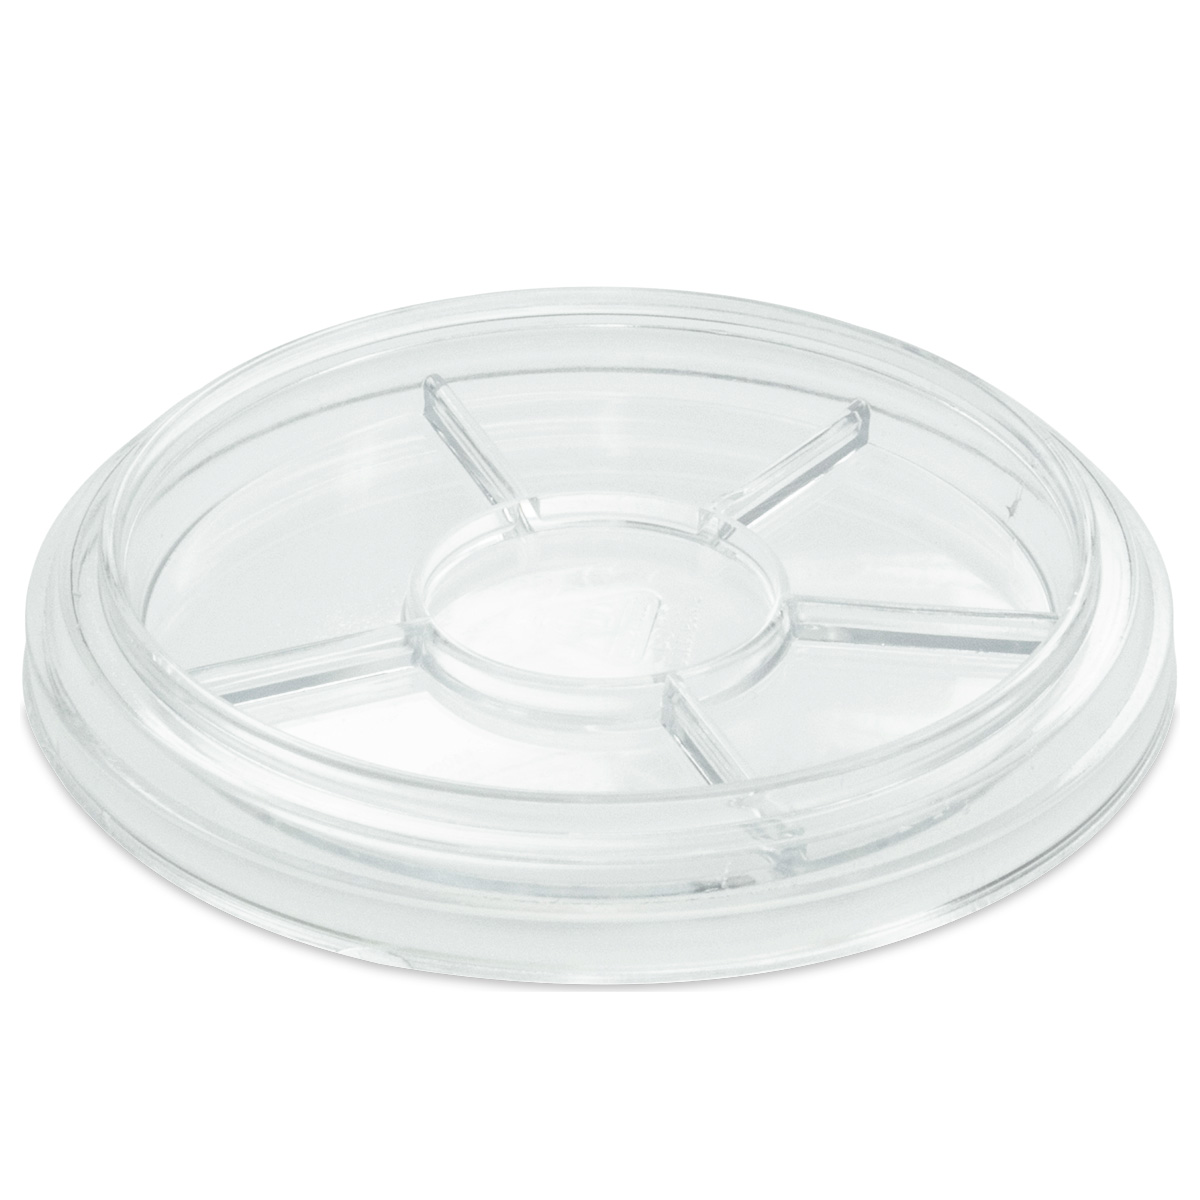 Bergeon 30097-BT parts tray, transparent, 6 compartments, inner Ø 88 mm